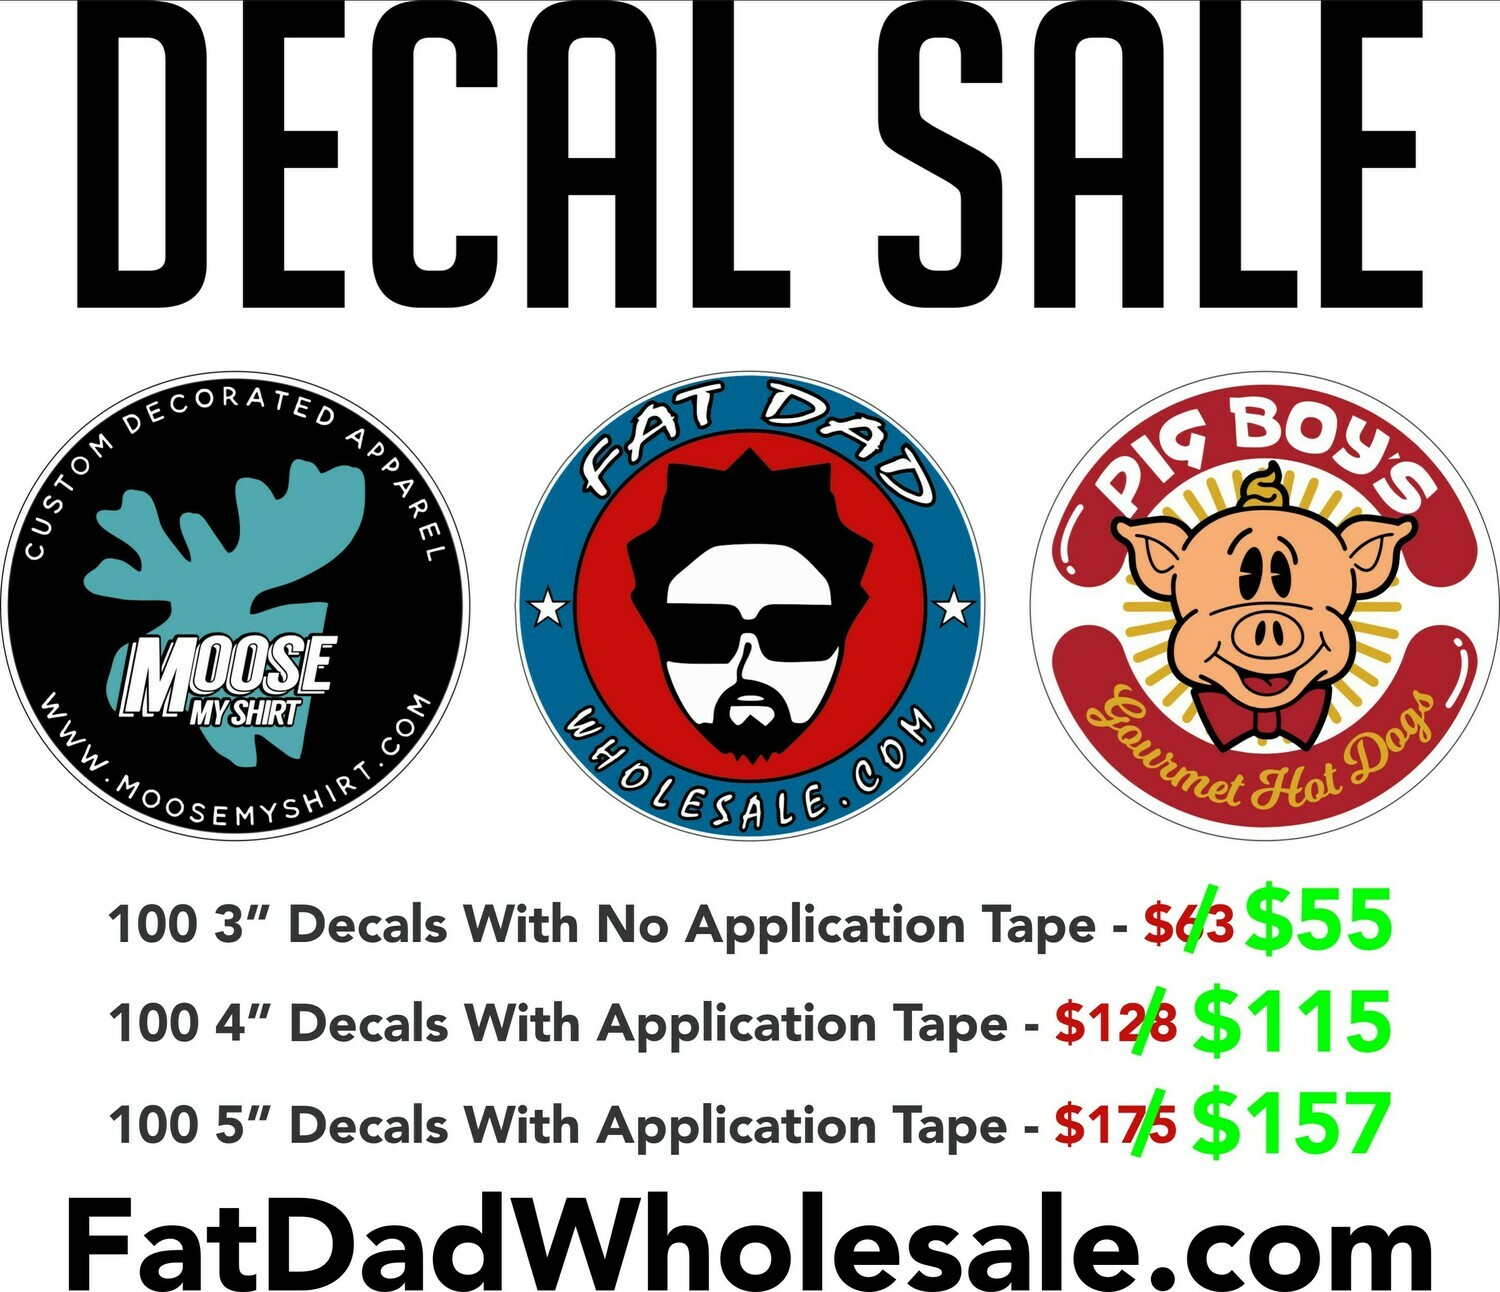 DECAL SALE